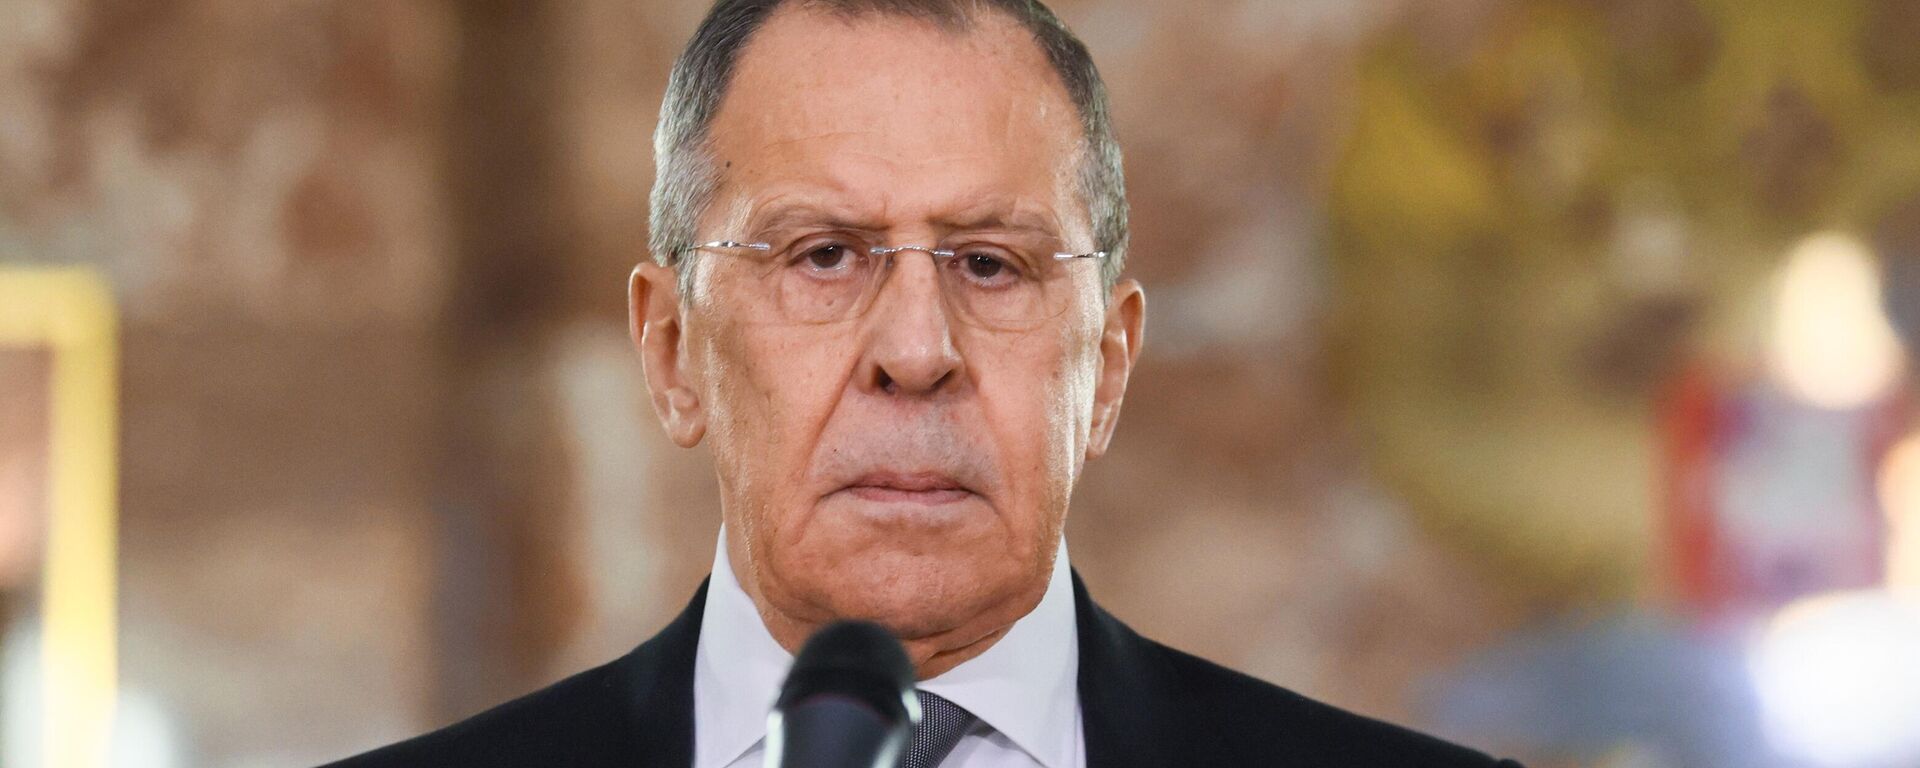 Russian Foreign Minister Sergei Lavrov at a Foreign Ministry ceremony in Moscow on February 10, 2023. - Sputnik International, 1920, 26.09.2023